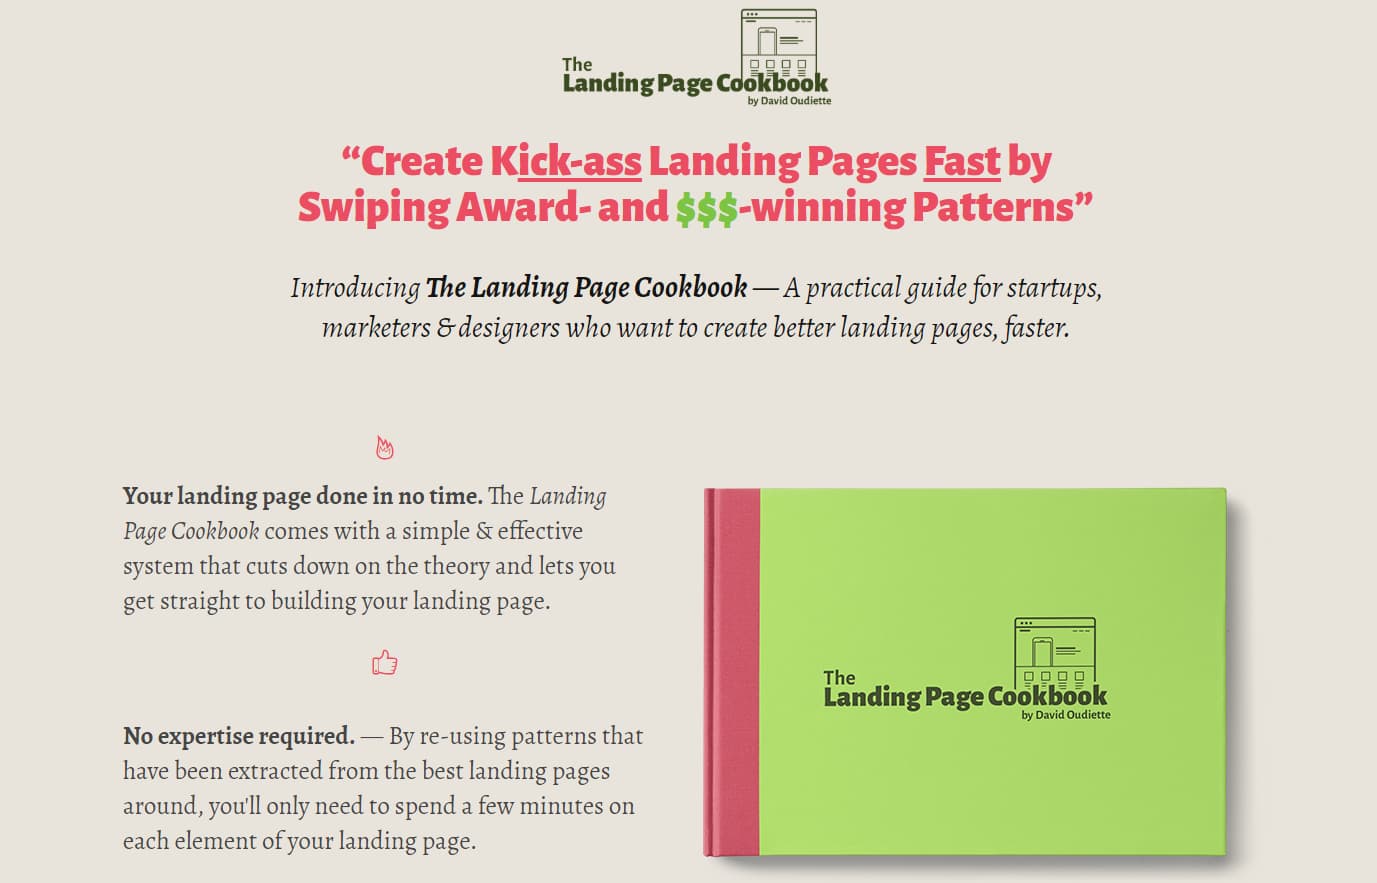 The landing page cookbook ebook